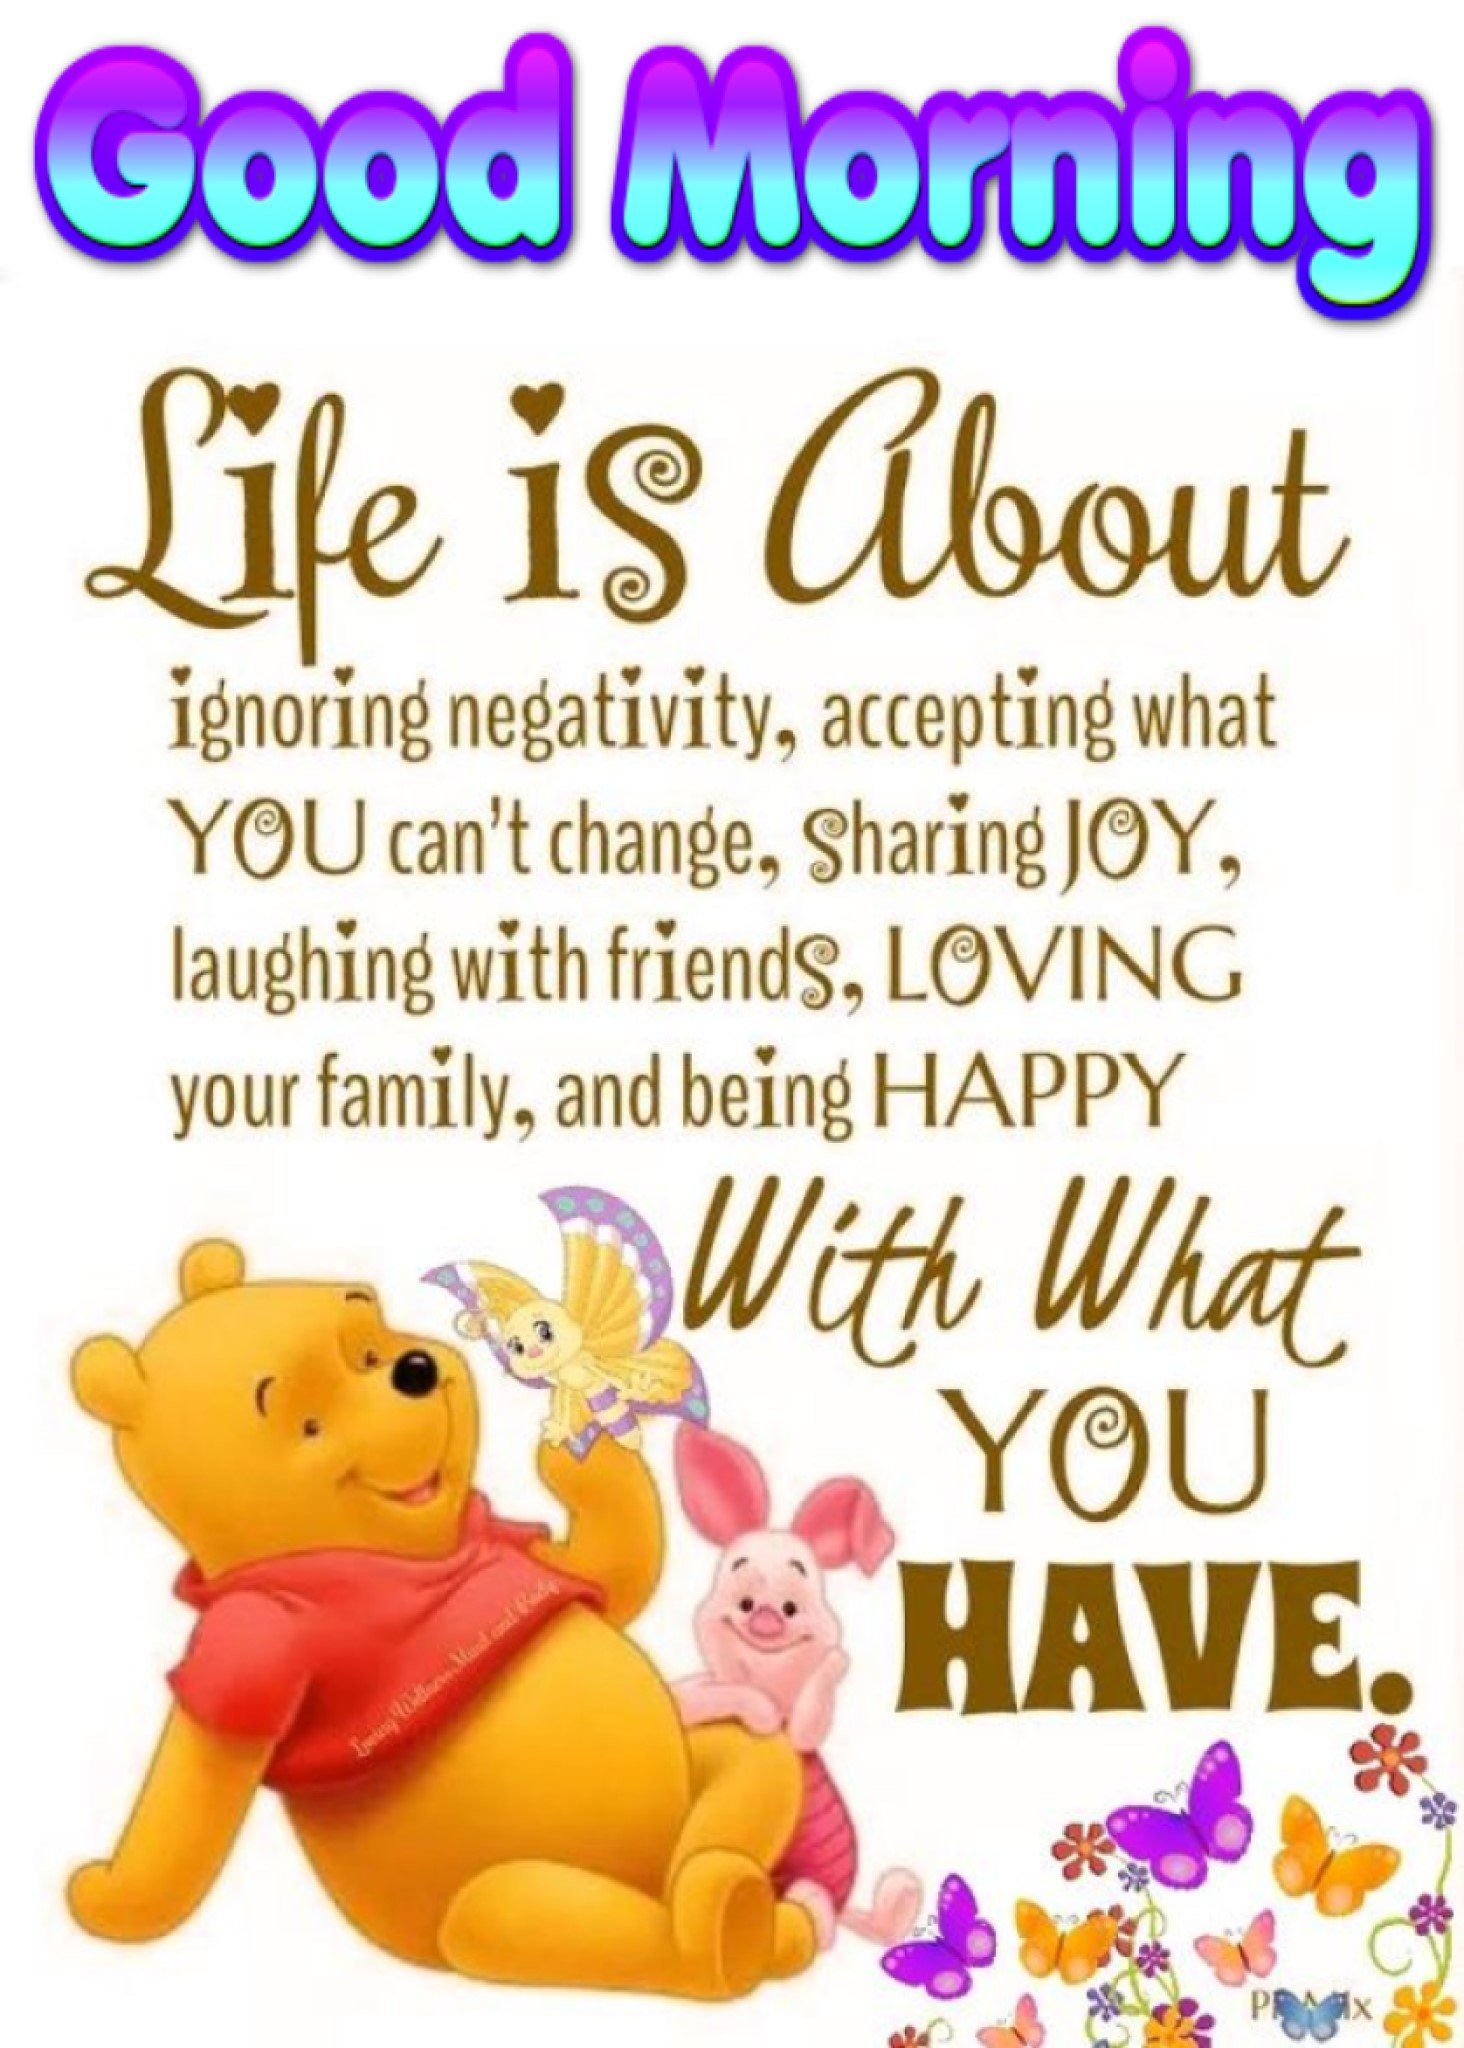 New Style Good Morning High Quality Winnie The Pooh Teddy Bear Cartoon Quotes 2024 Images Whatsapp Greetings Heart-Touching